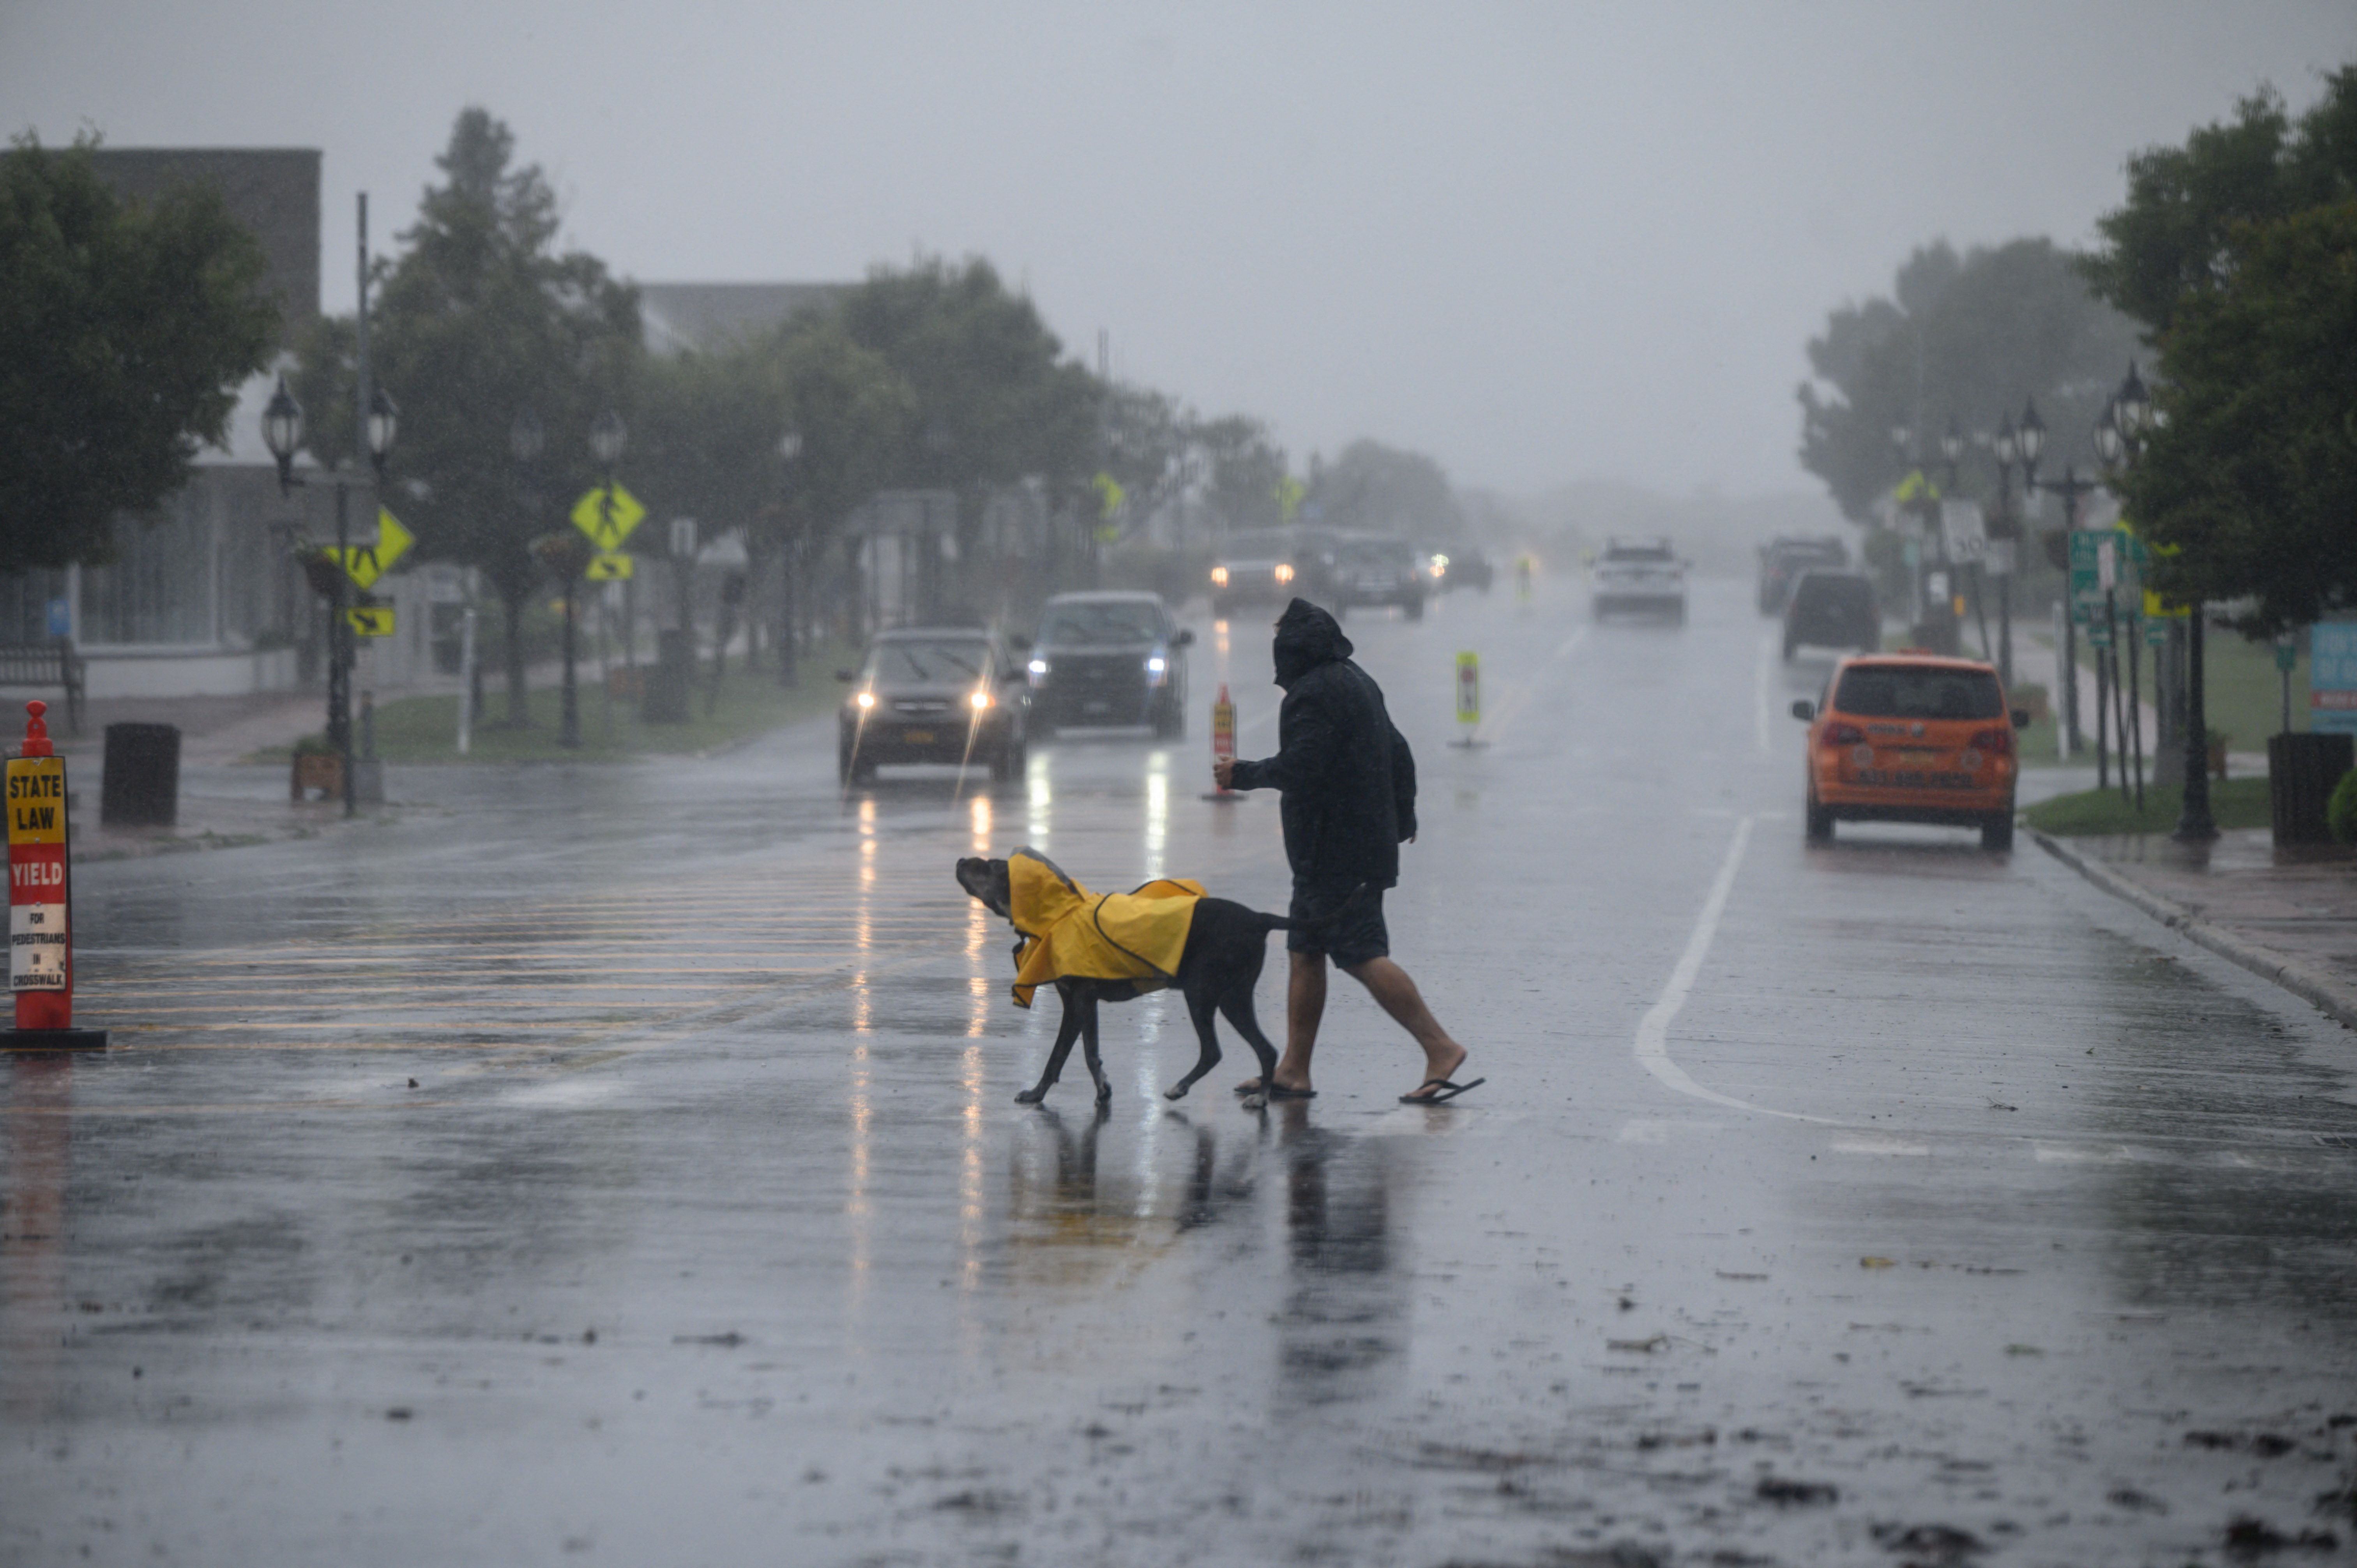  A man and dog walk cross a street before traffic as Tropical Storm Henri approaches, in Montauk, Long Island on August 22